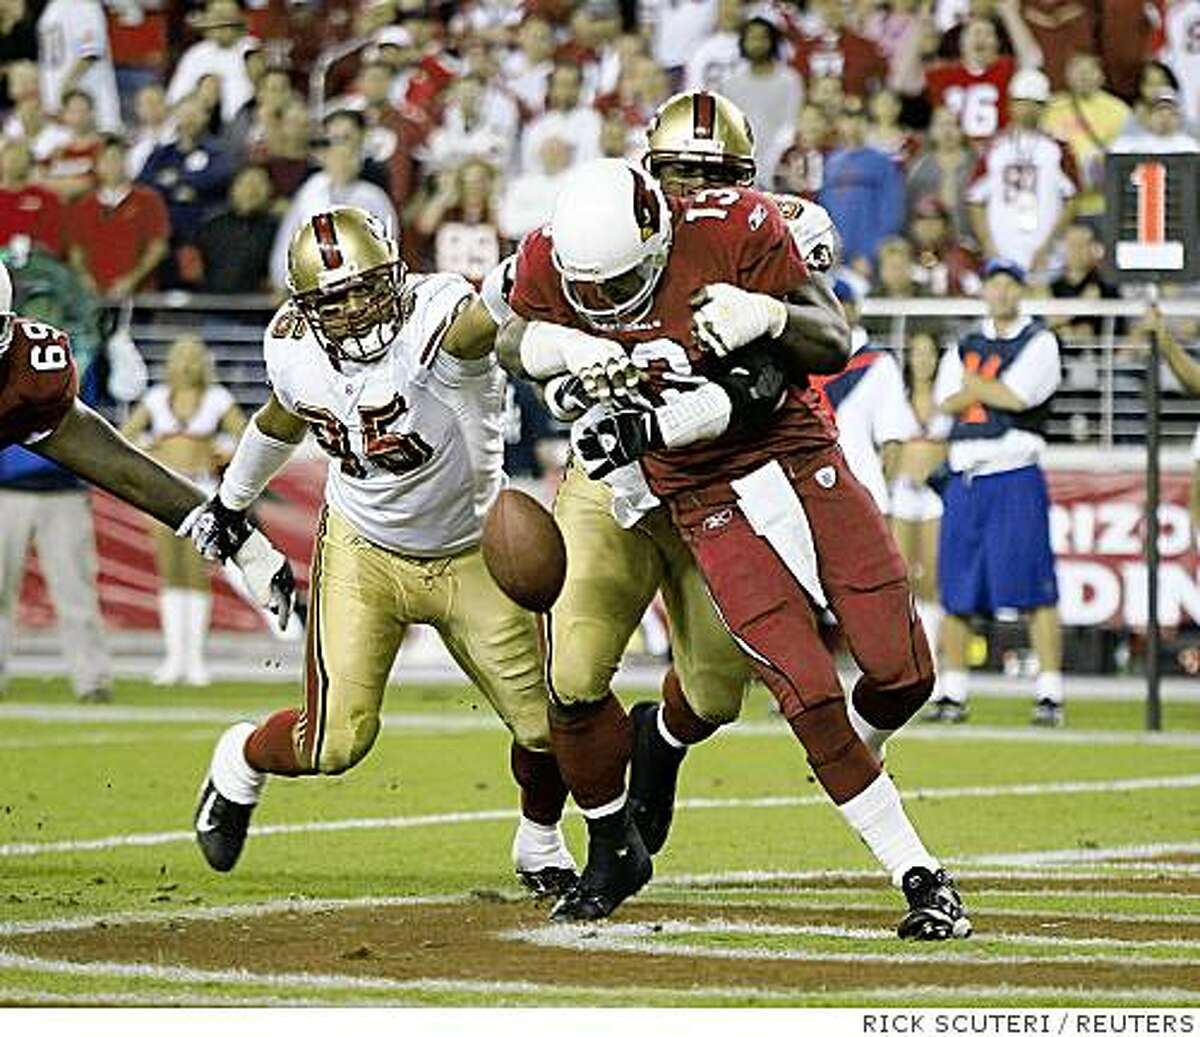 History: San Francisco 49ers defensive tackles Ronald Fields and Tully Banta-Cain (95) sack Arizona Cardinals quarterback Kurt Warner in the end zone causing him to fumble in over-time during their NFL game in Glendale, Arizona, November 25, 2007. Banta-Cain recovered the fumble for a touch down giving the 49ers a 37-31 win. REUTERS/Rick Scuteri (UNITED STATES)Ran on: 11-26-2007The 49ers' Ronald Fields wraps up Cardinals QB Kurt Warner in the end zone, setting up an improbable win in overtime.Ran on: 11-26-2007The 49ers' Ronald Fields wraps up Cardinals QB Kurt Warner in the end zone, setting up an improbable win in overtime. San Francisco 49ers defensive tackles Ronald Fields and Tully Banta-Cain (95) sack Arizona Cardinals quarterback Kurt Warner in the end zone causing him to fumble in over-time during their NFL game in Glendale, Arizona, November 25, 2007. Banta-Cain recovered the fumble for a touch down giving the 49ers a 37-31